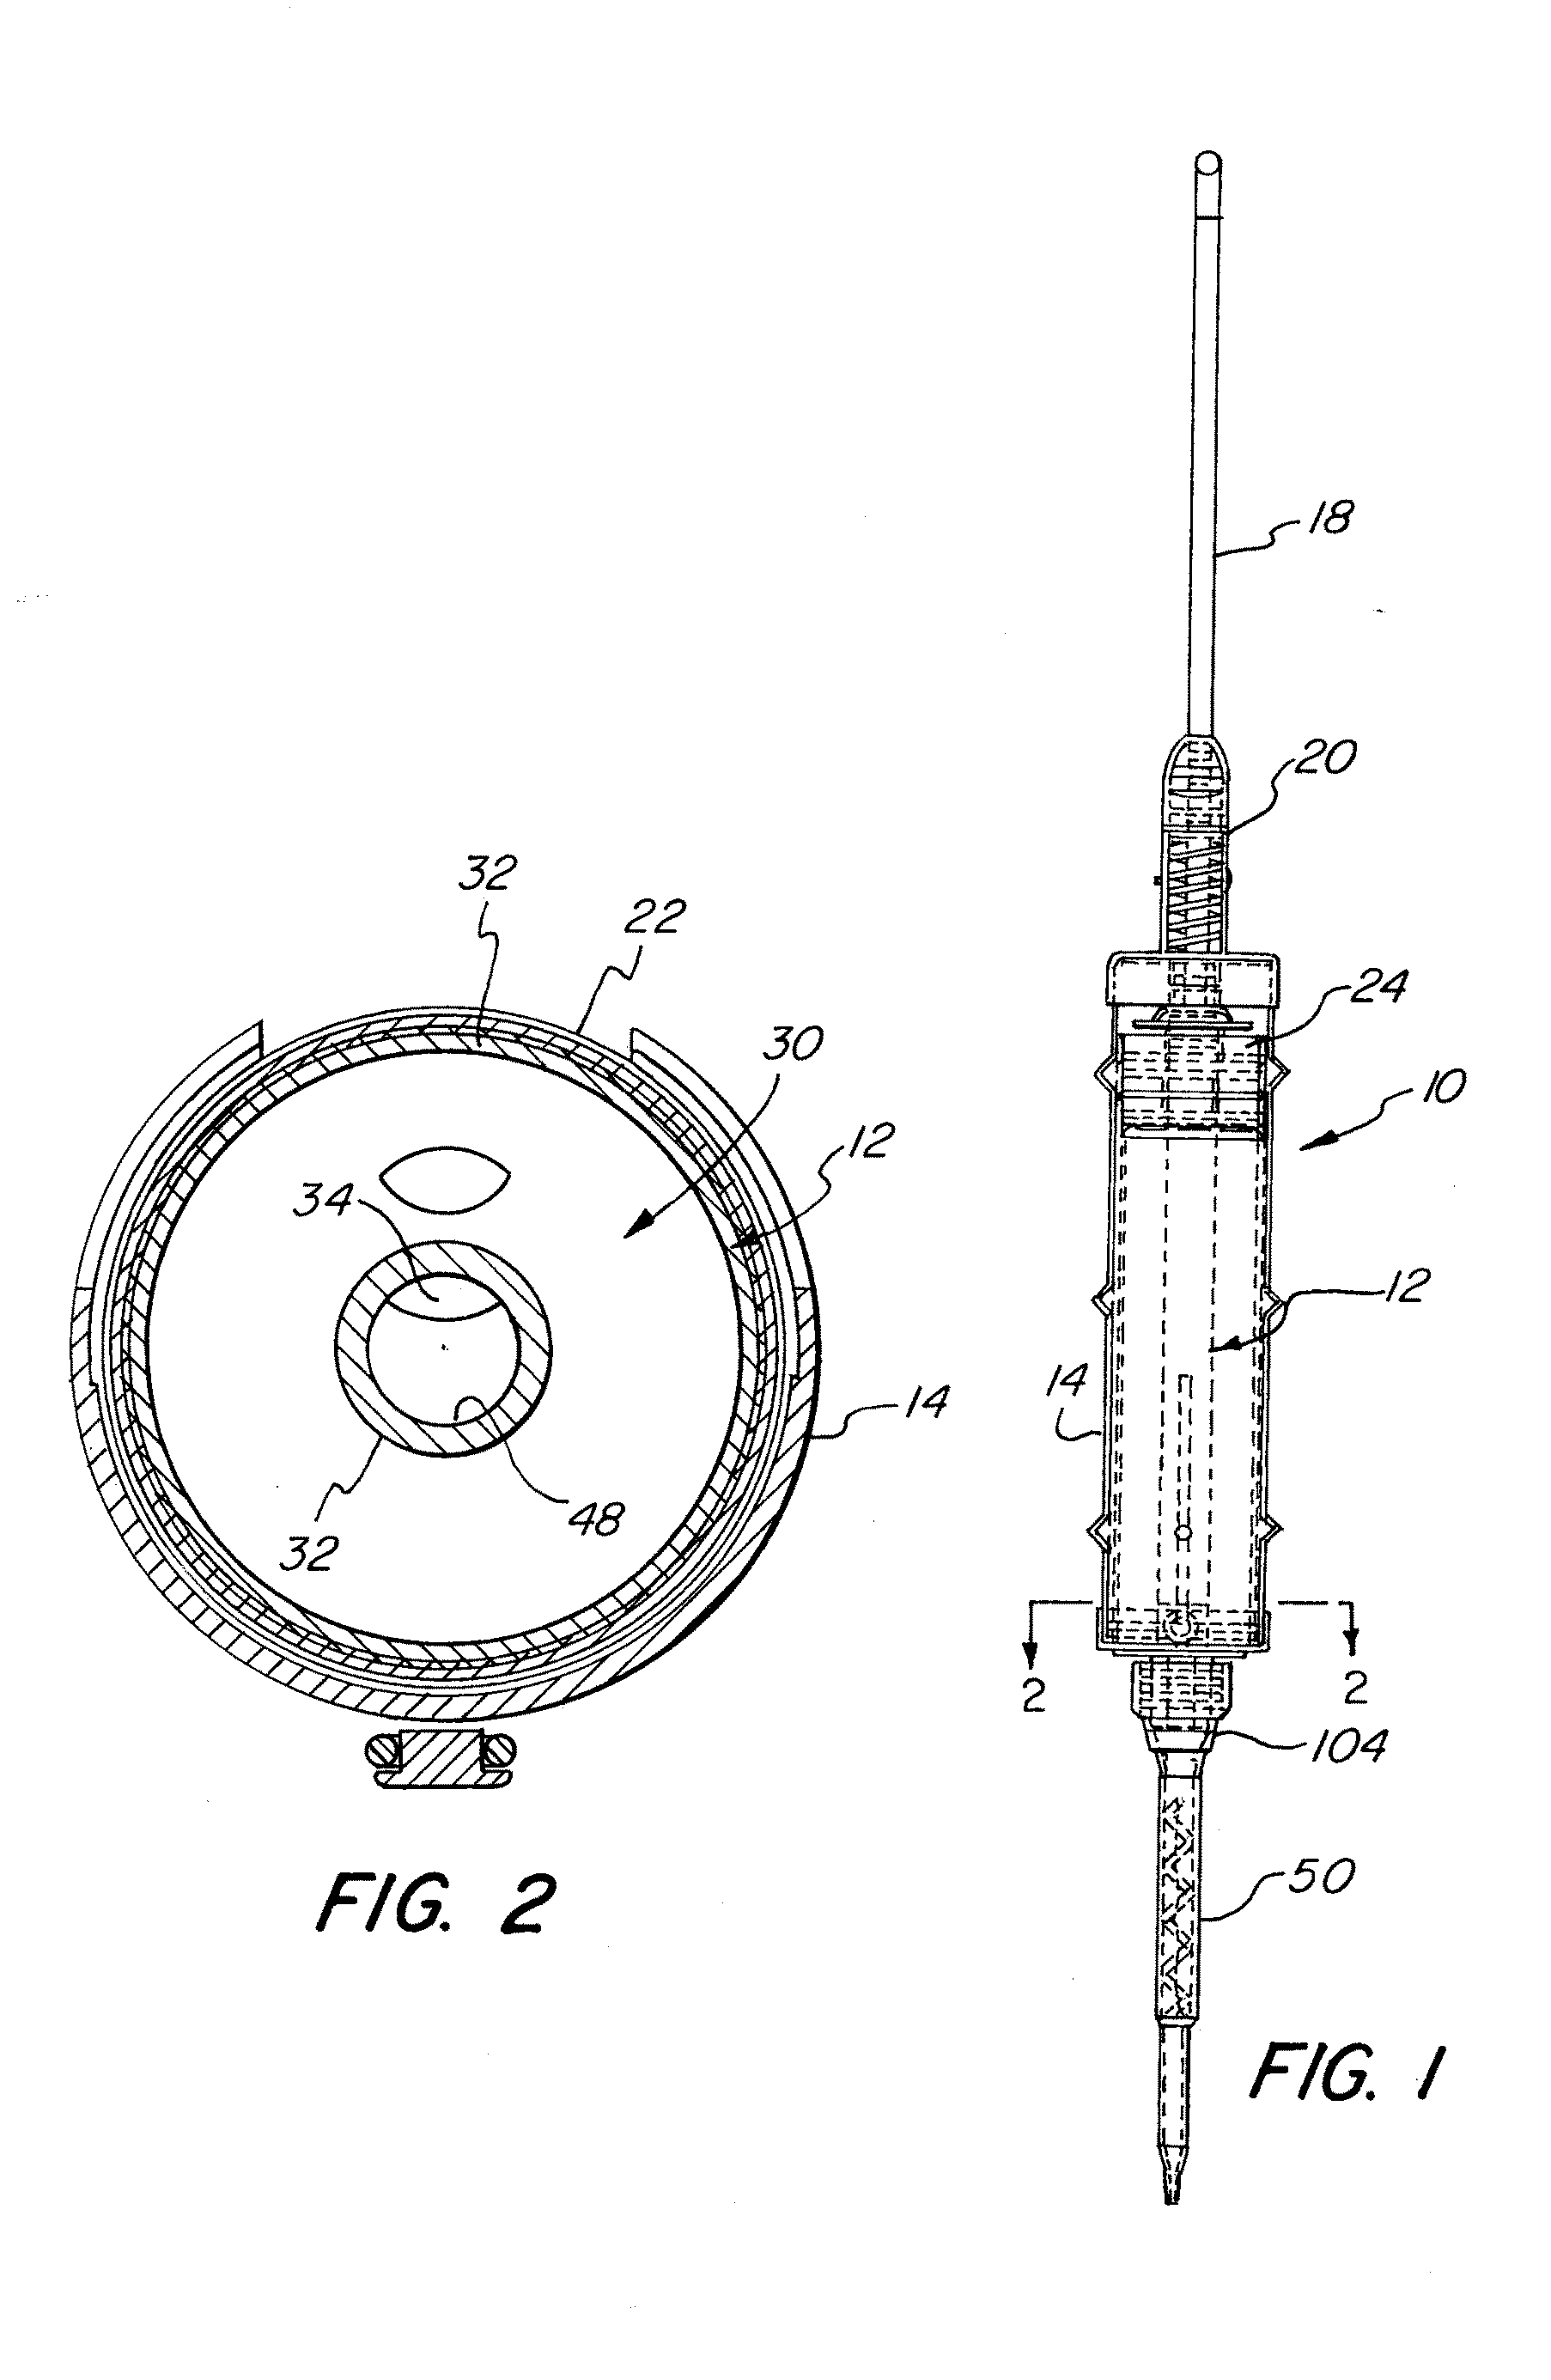 Cartridge delivery system utilizing film bags